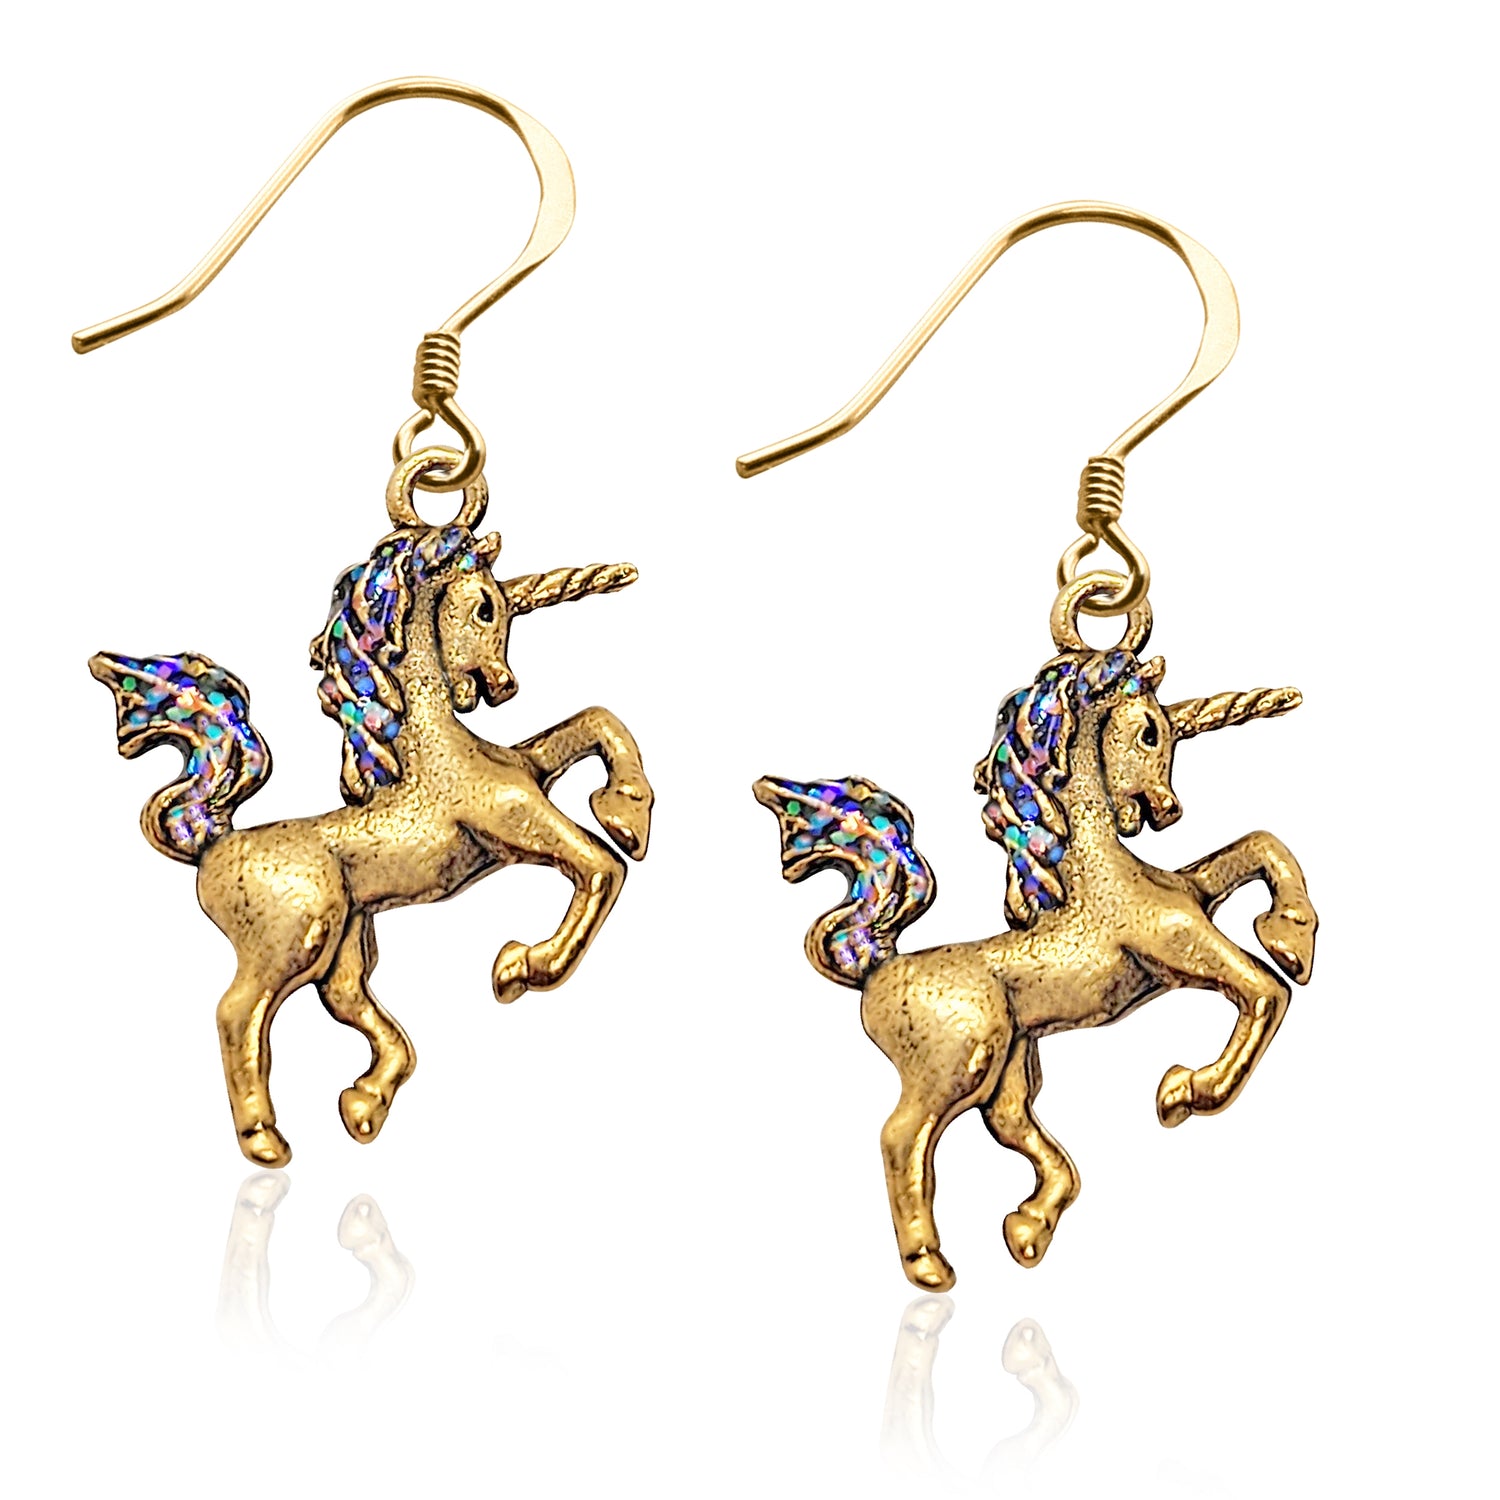 Whimsical Gifts | Unicorn Charm Earrings in Gold Finish | Youth Themed |  | Jewelry